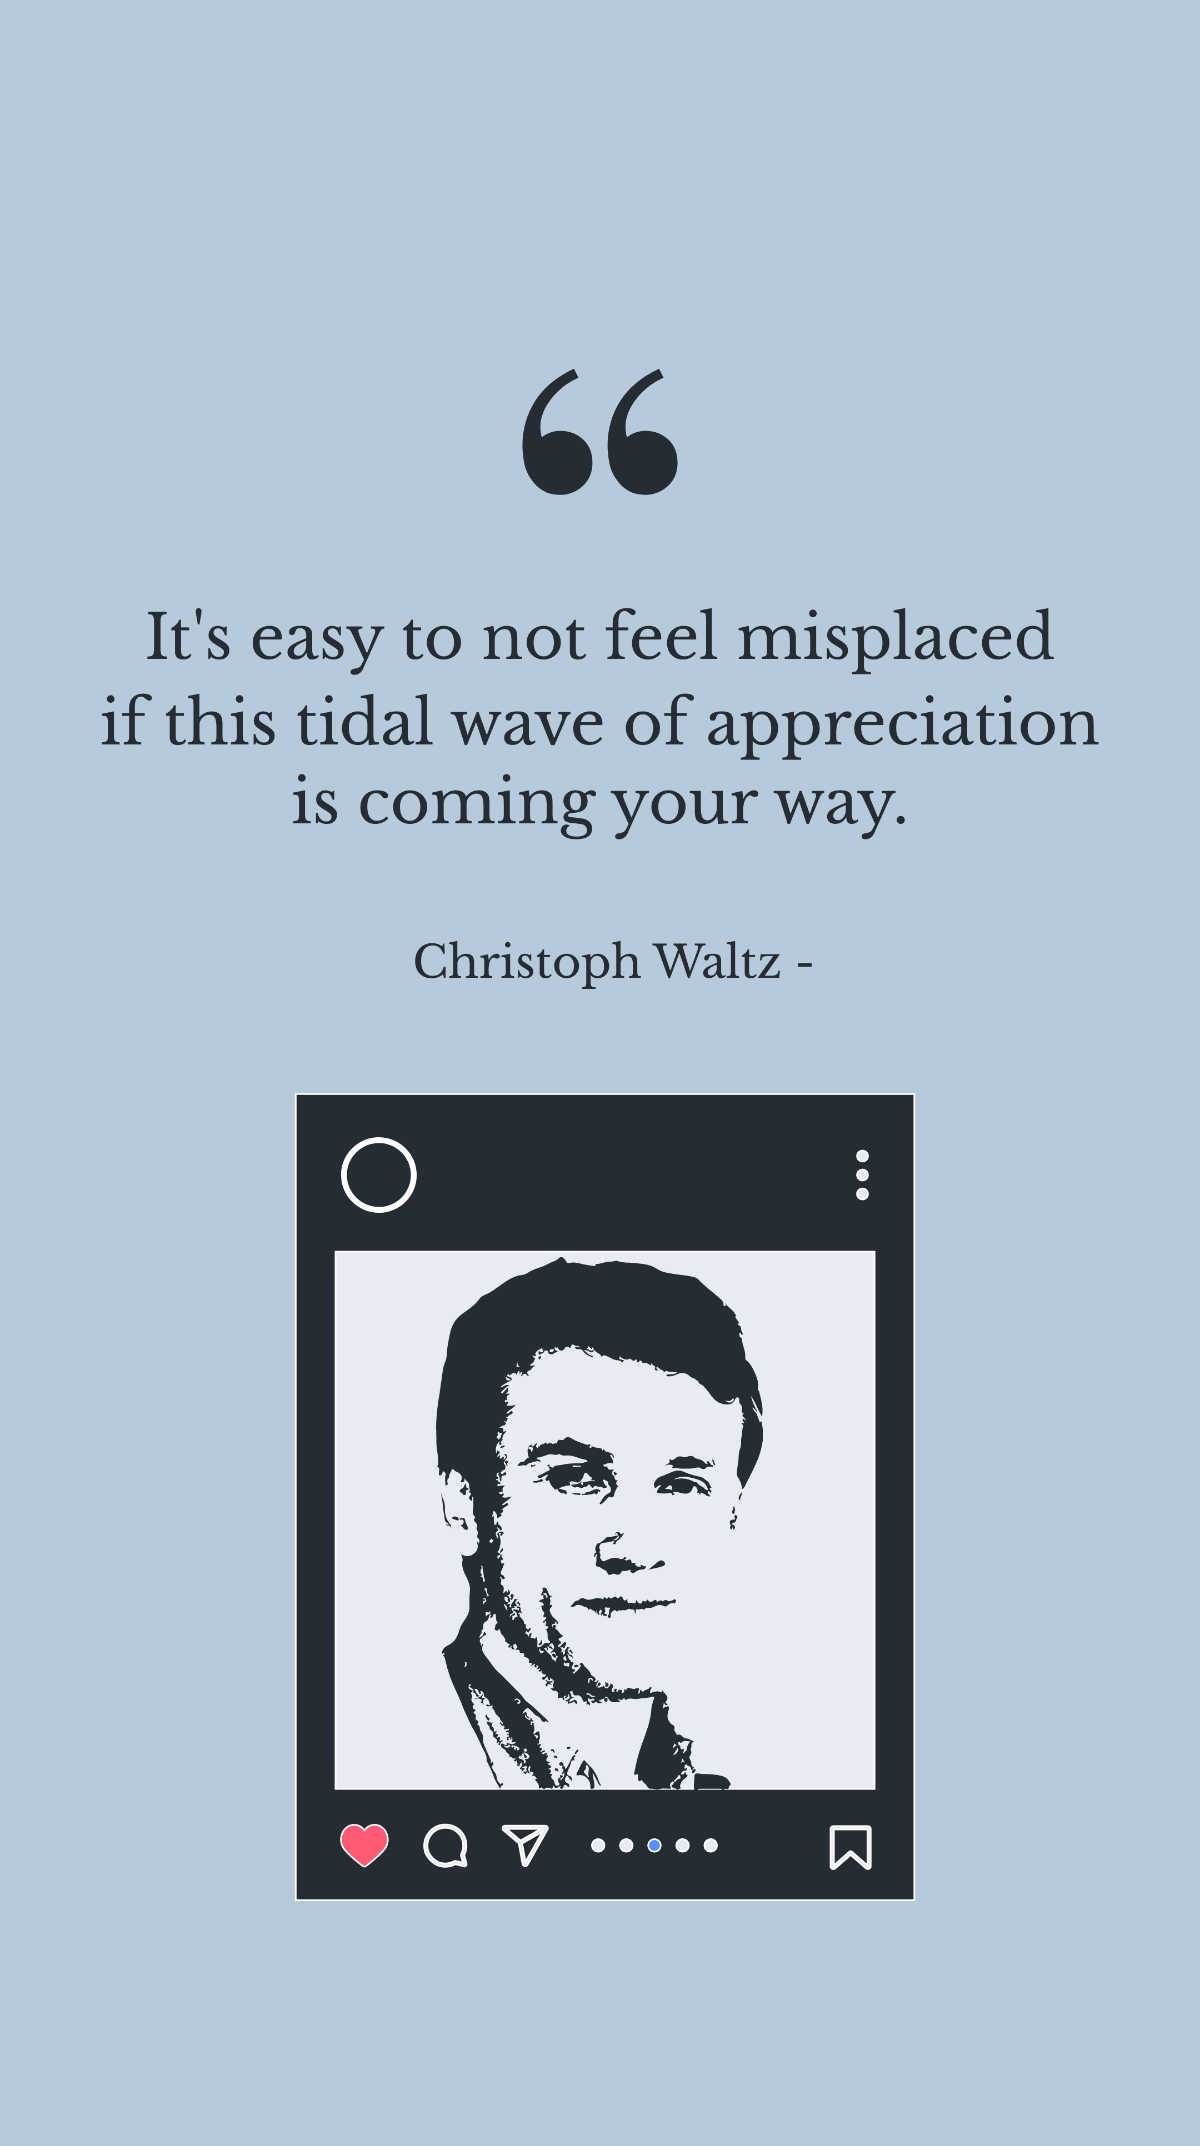 Free Christoph Waltz - It's easy to not feel misplaced if this tidal wave of appreciation is coming your way. Template